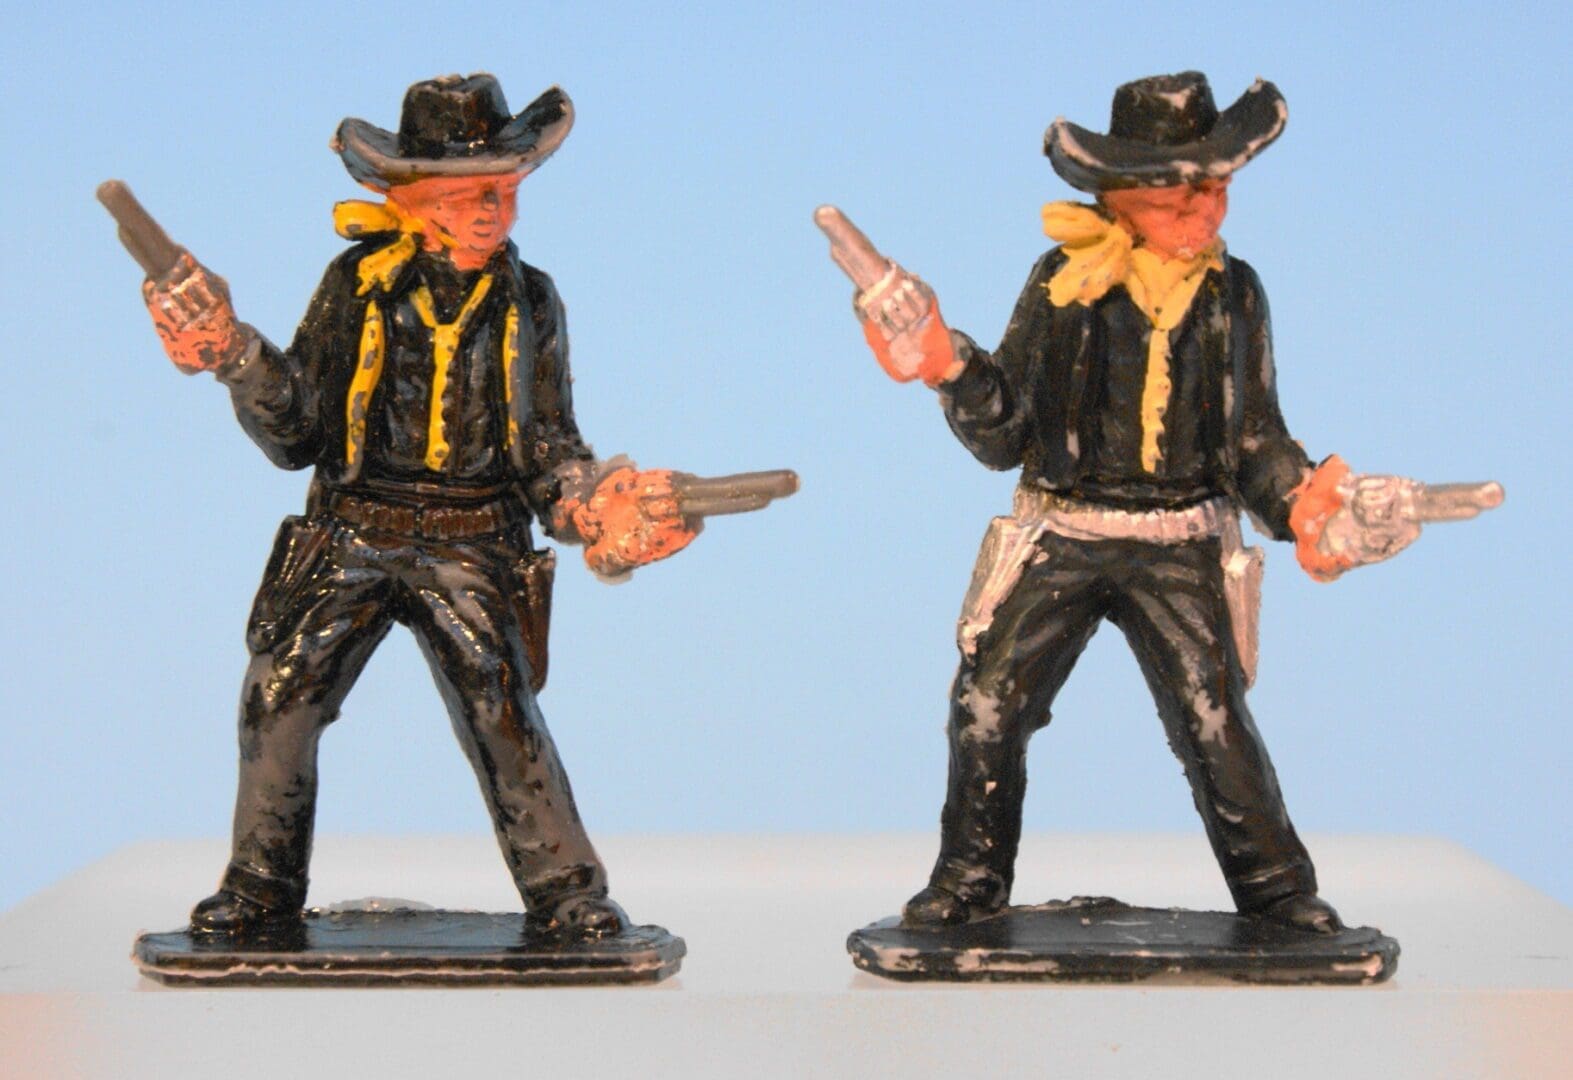 SOLD Lone Star Cowboy Gunslingers (Herald Copies) - Herald Toys and Models